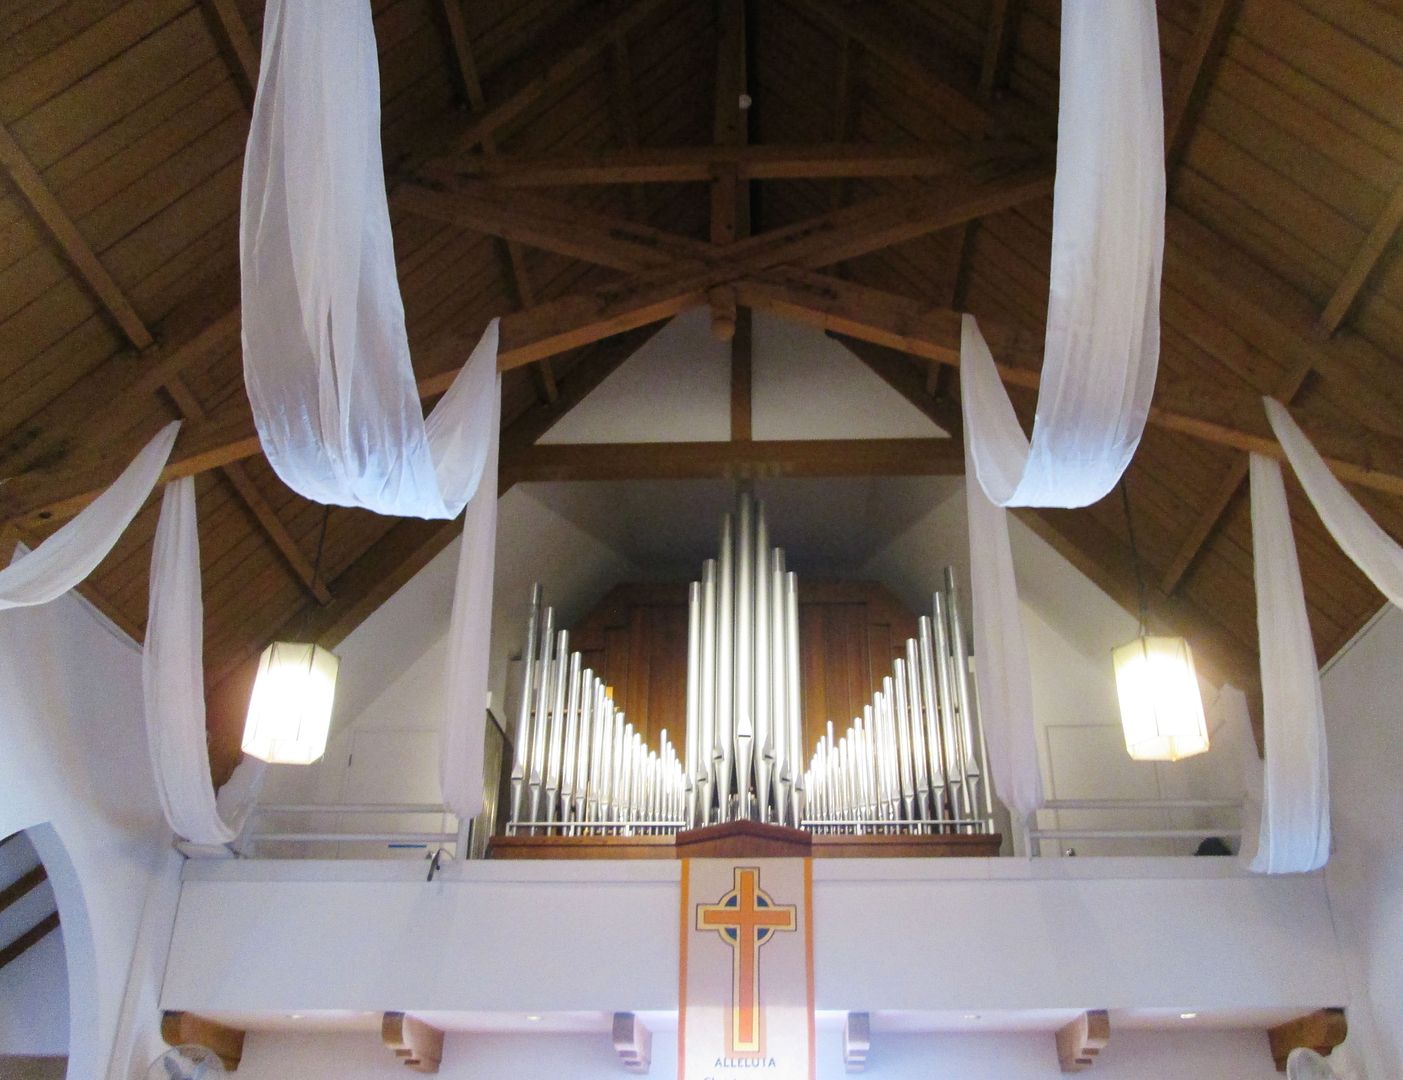 sanctuary rafters easter banners